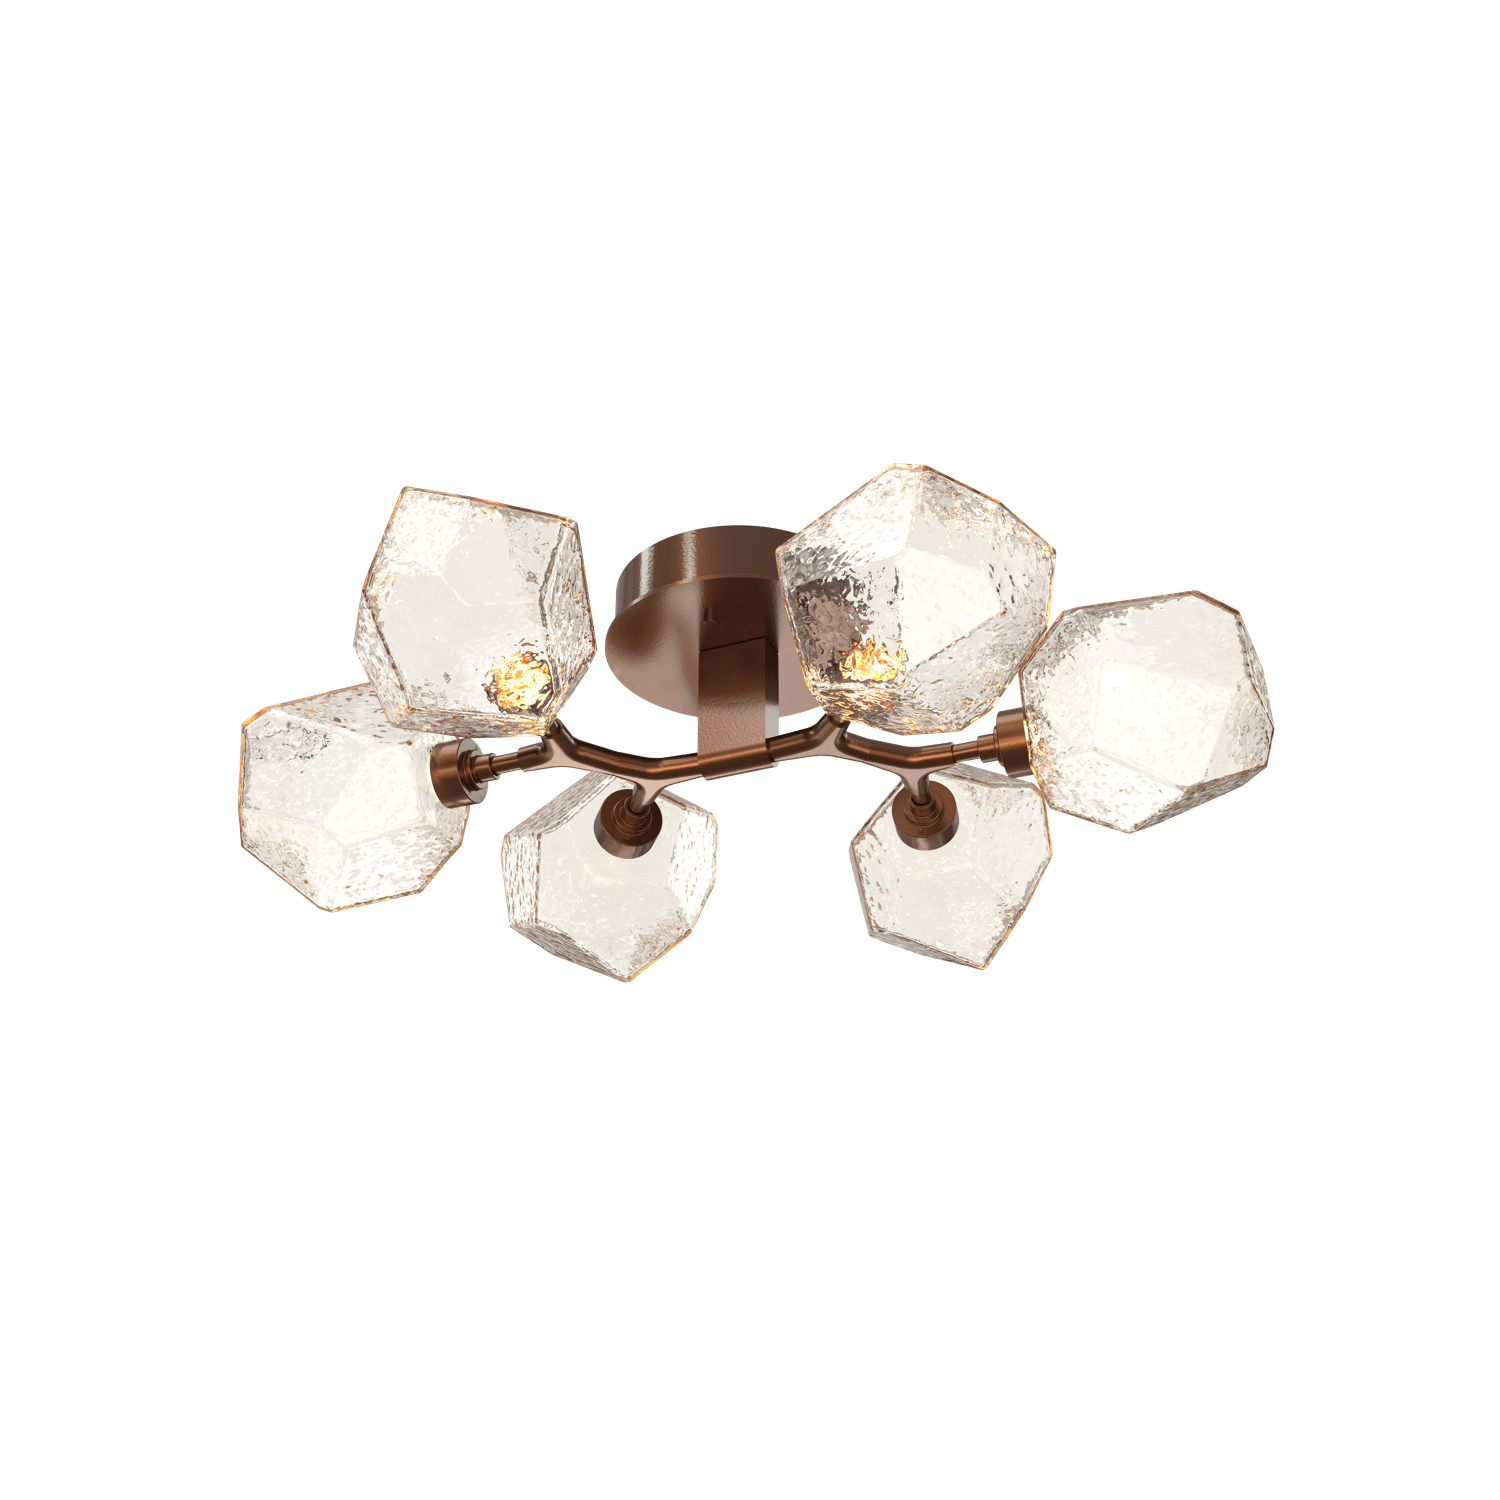 CLB0039-01-BB-A-Hammerton-Studio-Gem-6-light-organic-flush-mount-light-with-burnished-bronze-finish-and-amber-blown-glass-shades-and-LED-lamping